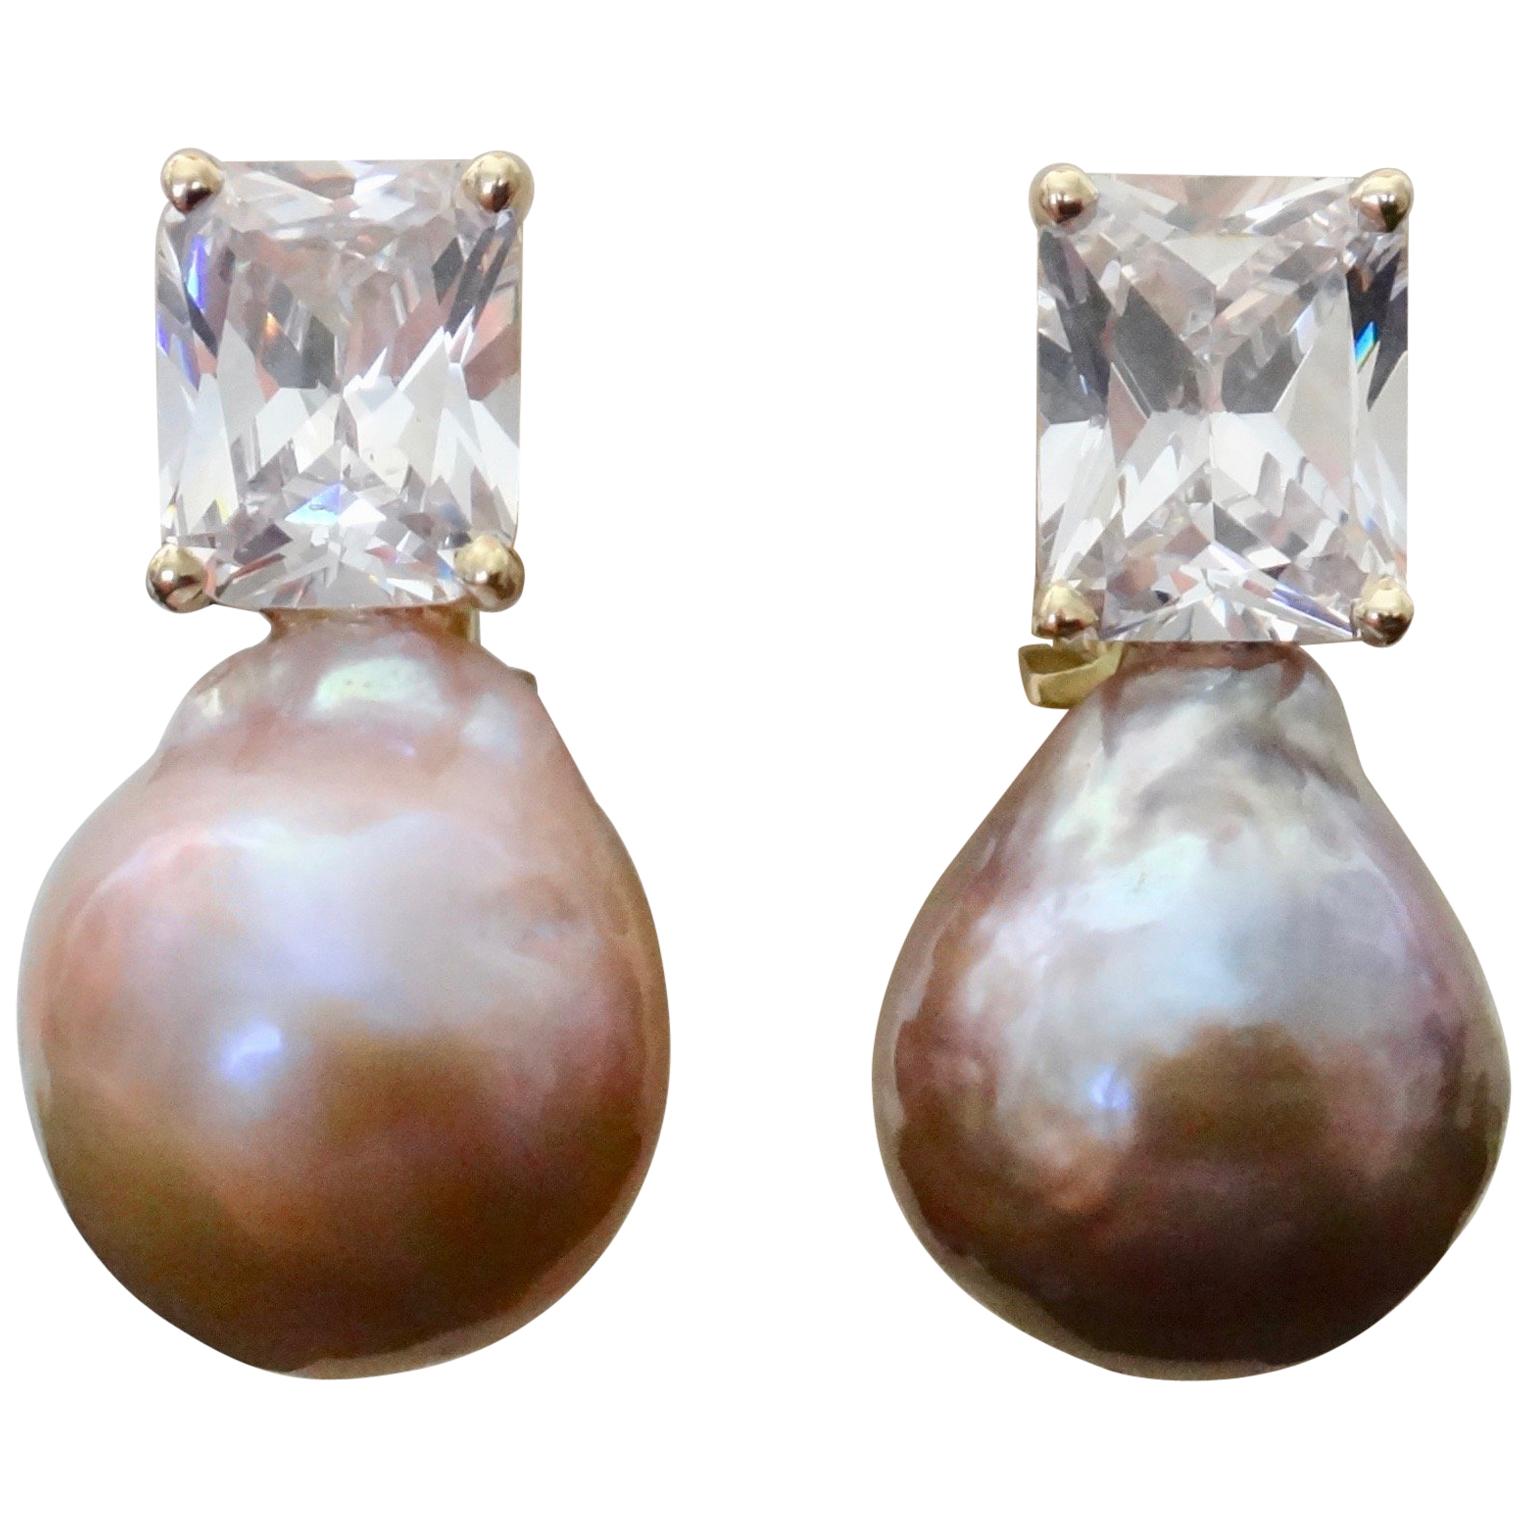 A brilliant pair of pink Kasumi pearls (origin: Japan) are paired with radiant cut white sapphires in these classic drop earrings.  Kasumi pearls are famous for their rich colors and metallic finish.  They measure 17mm long and along with the